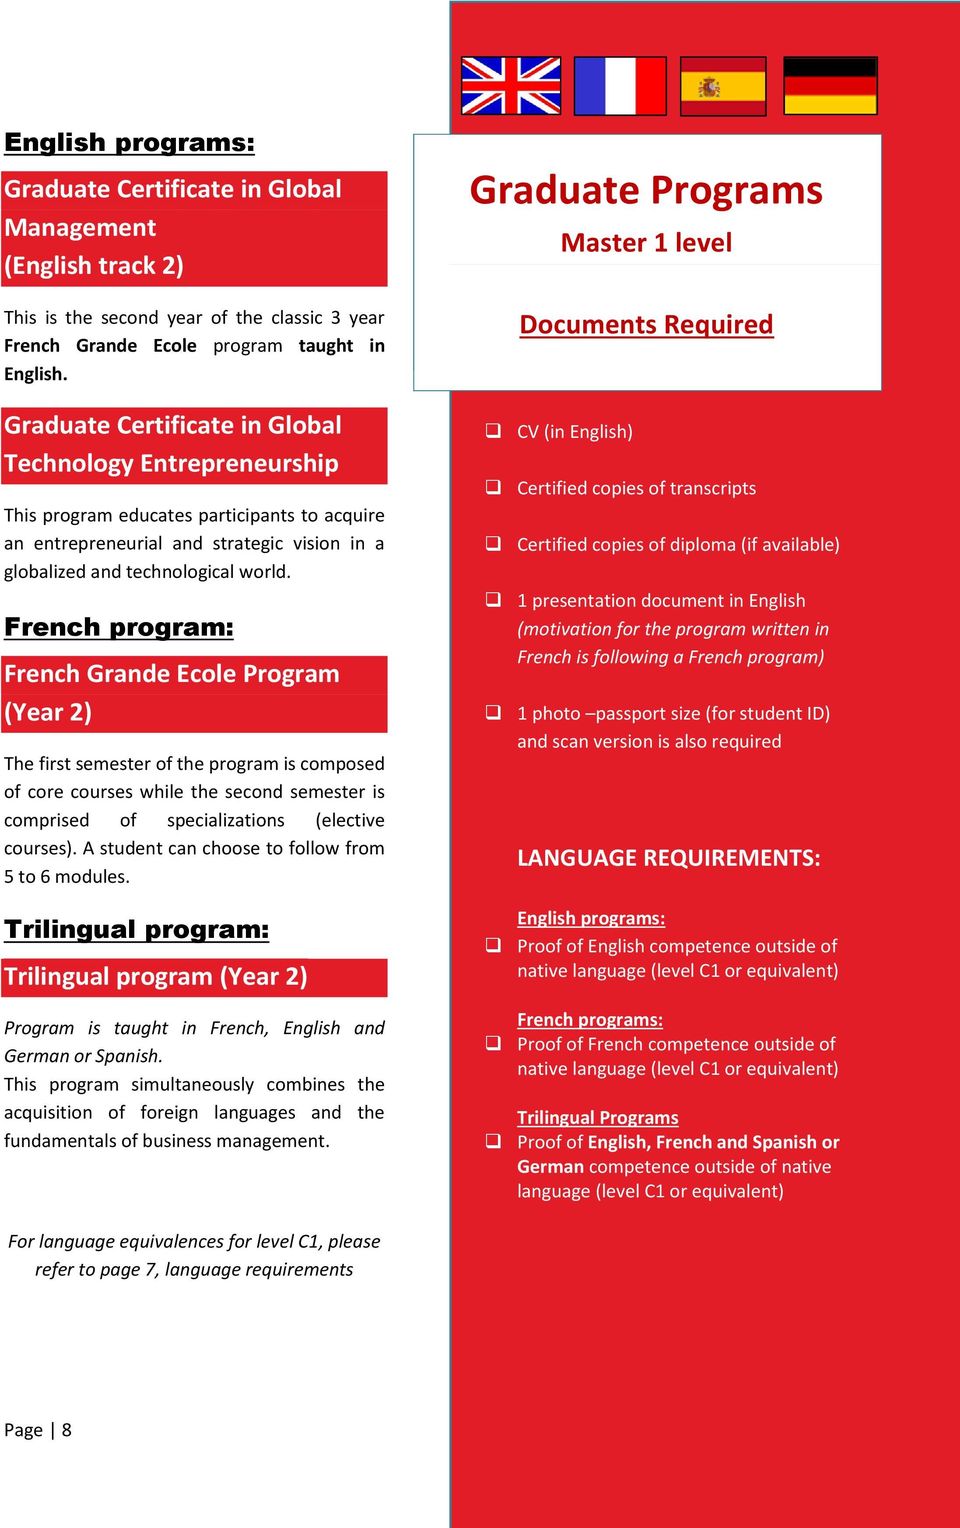 French program: French Grande Ecole (Year 2) The first semester of the program is composed of core courses while the second semester is comprised of specializations (elective courses).